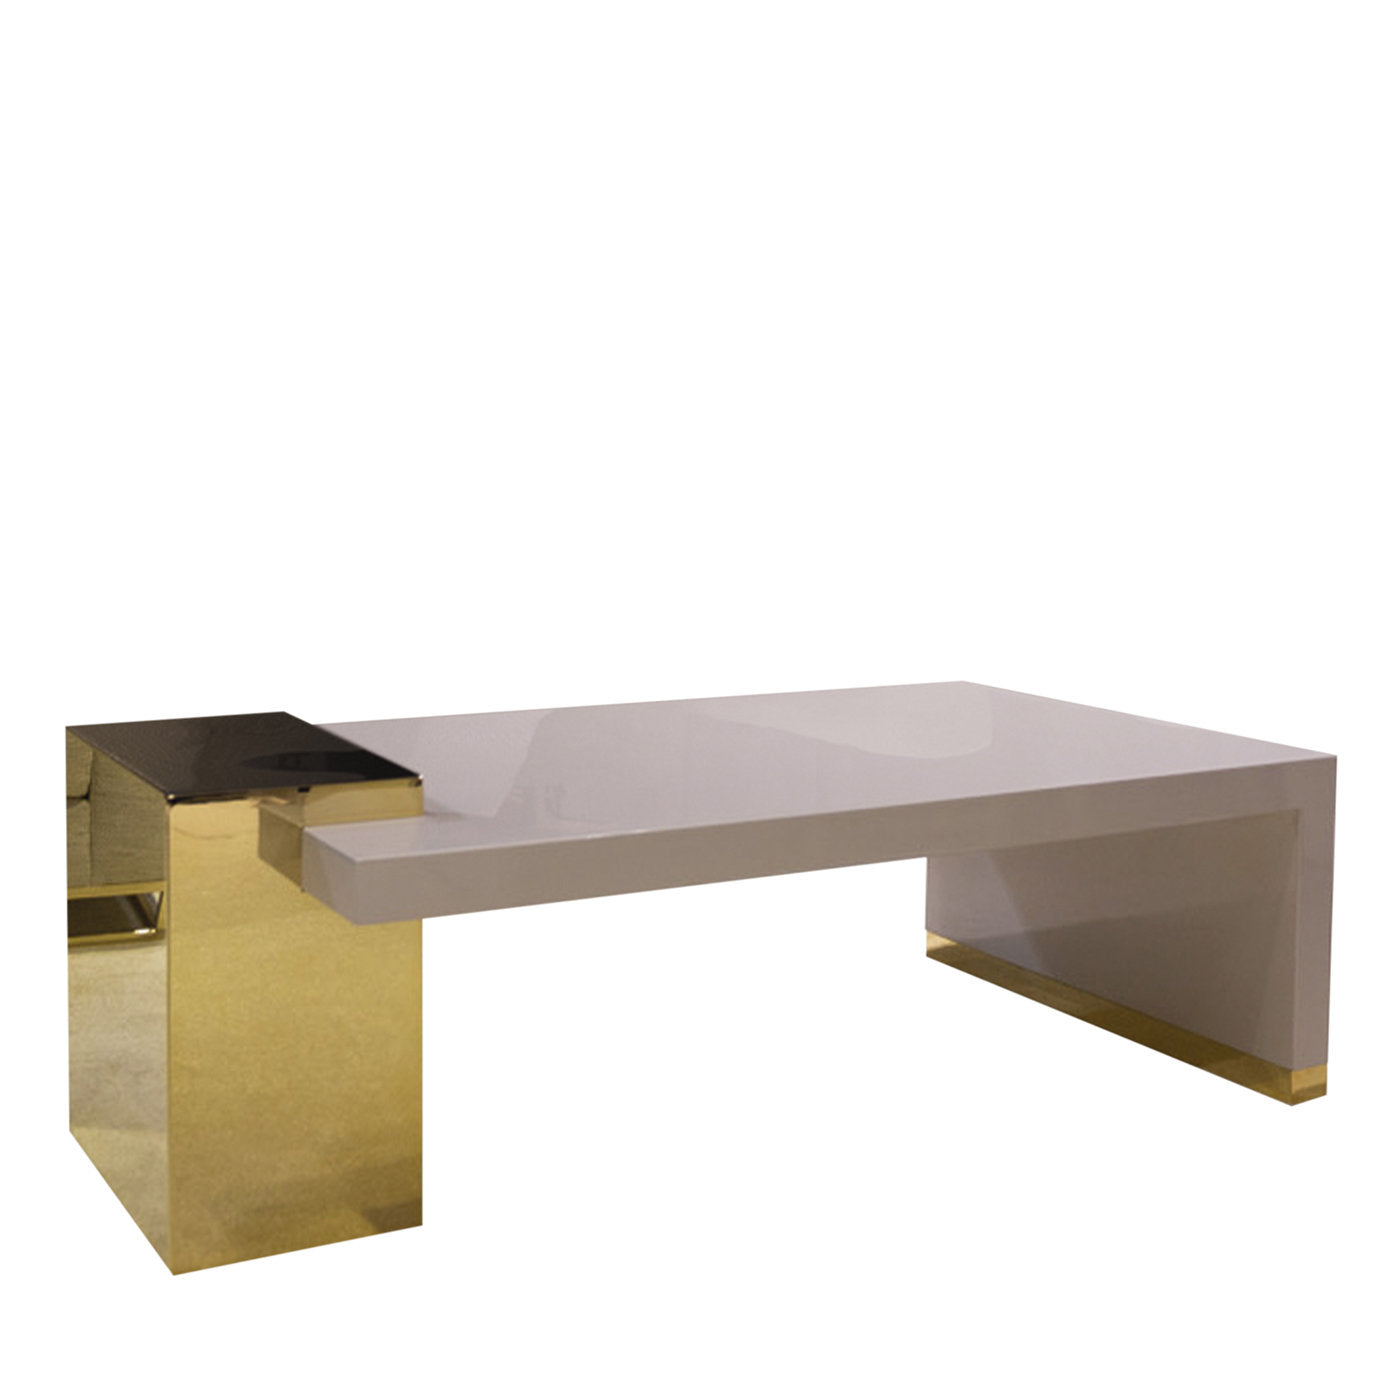 Hopper Coffee Table by Giannella Ventura - Main view